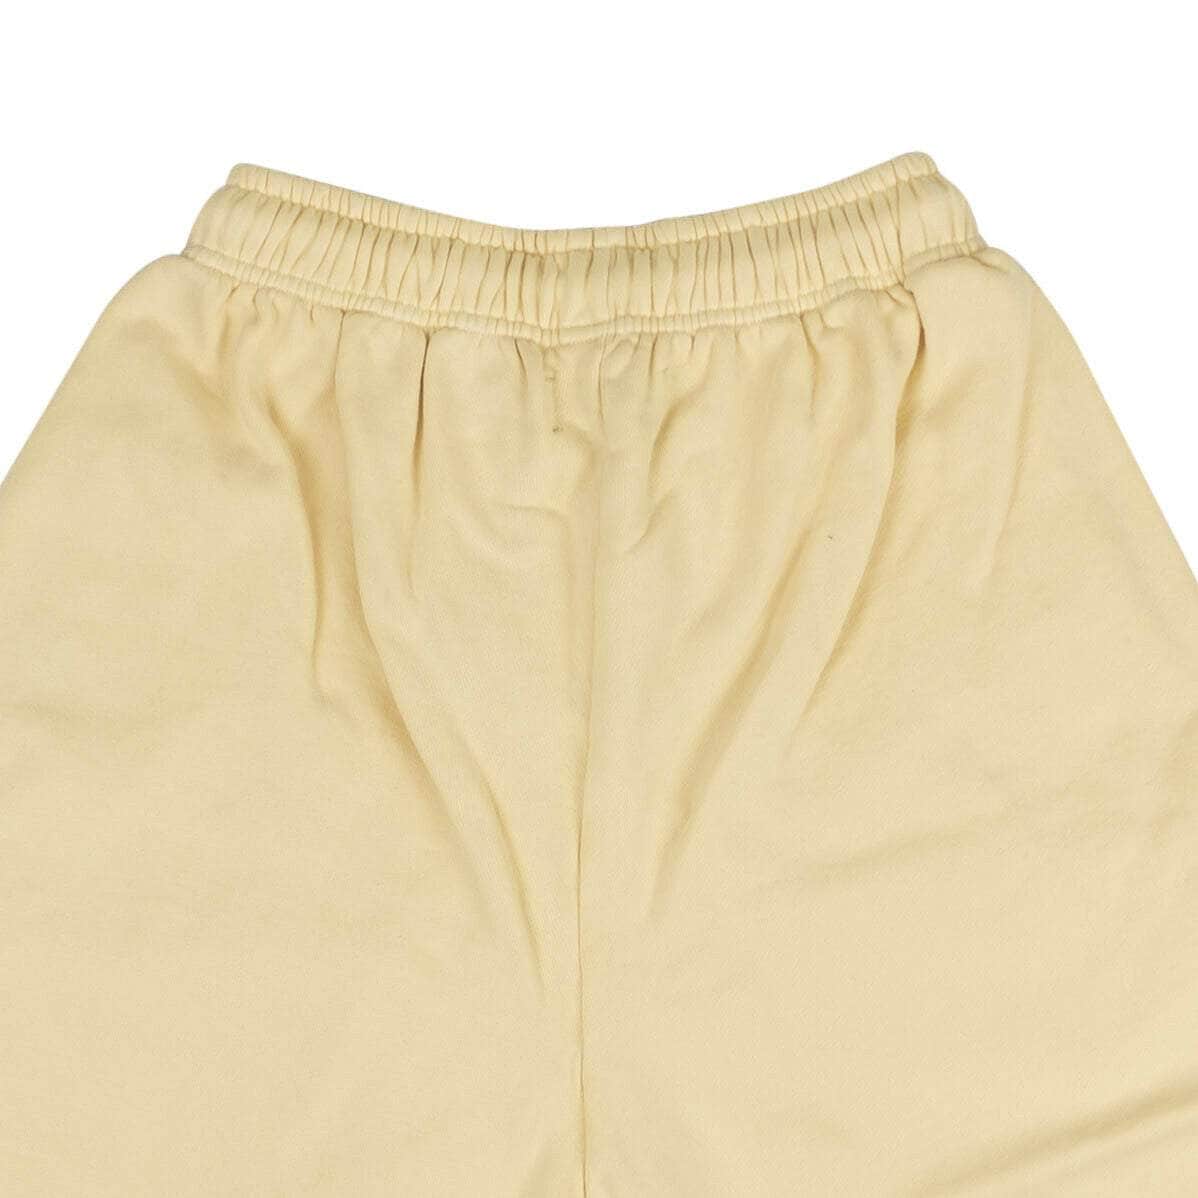 424 ON FAIRFAX 424-on-fairfax, channelenable-all, chicmi, couponcollection, gender-mens, main-clothing, mens-shoes, size-m, size-s, size-xs, under-250 XS Cream Logo Patch Sweat Shorts 95-424-1055/XS 95-424-1055/XS